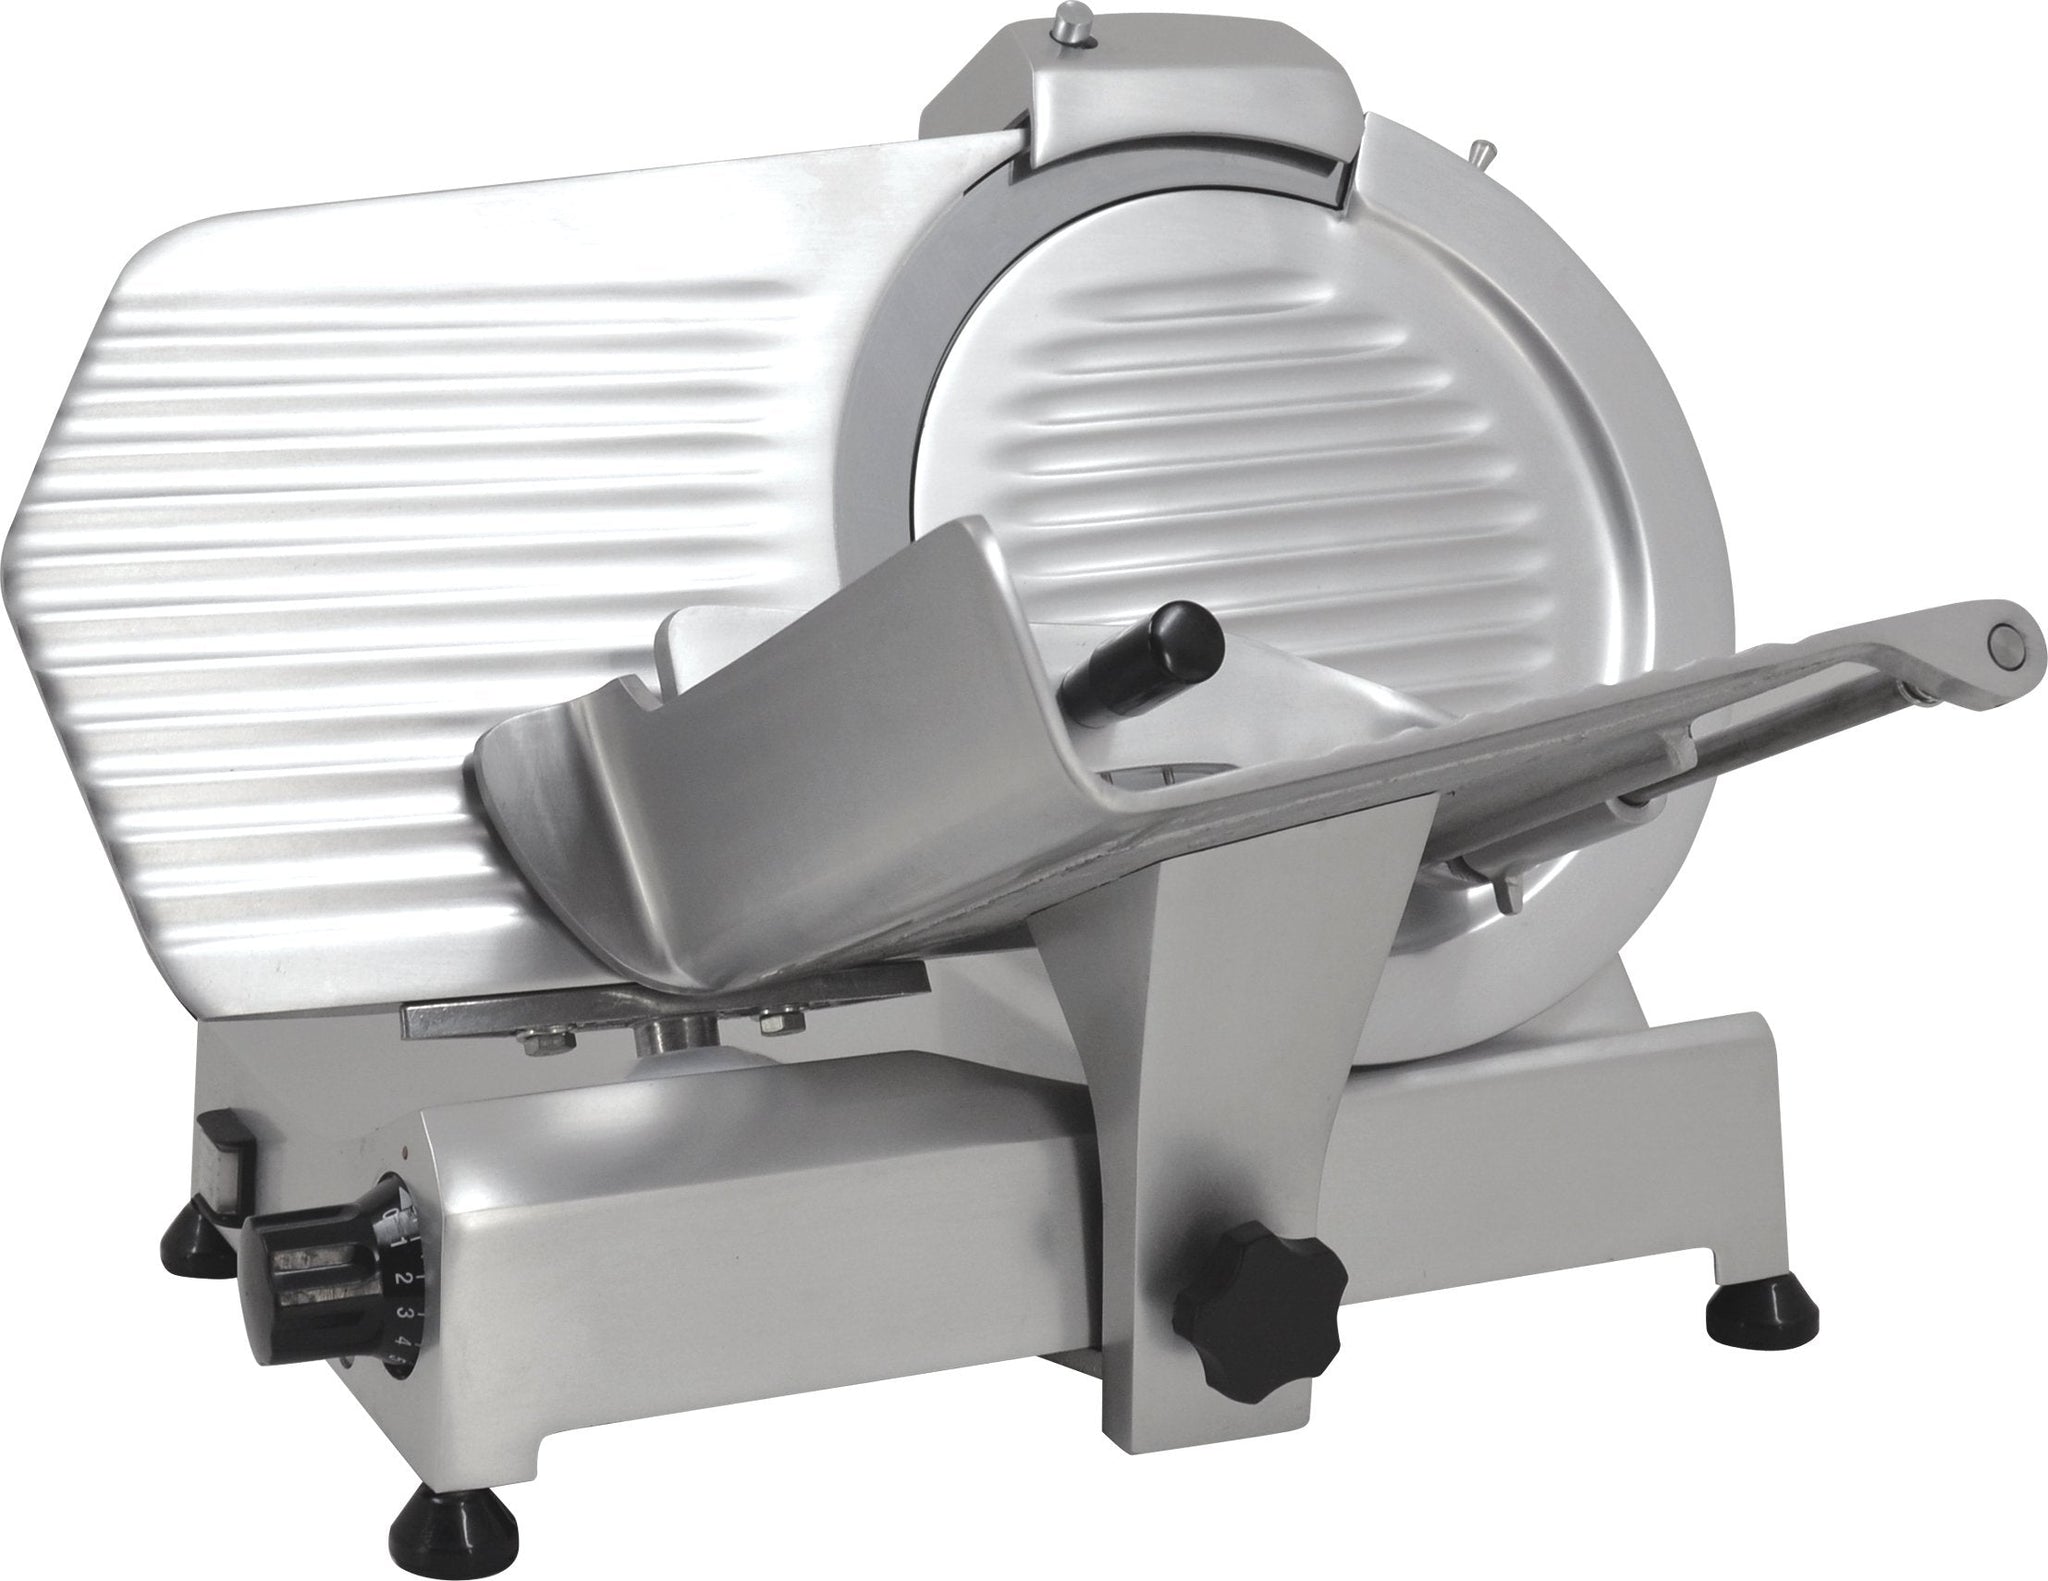 Omcan - 12” Blade Elite Slicer with 0.35 HP Motor & Compact Body - MS-IT-0300-I